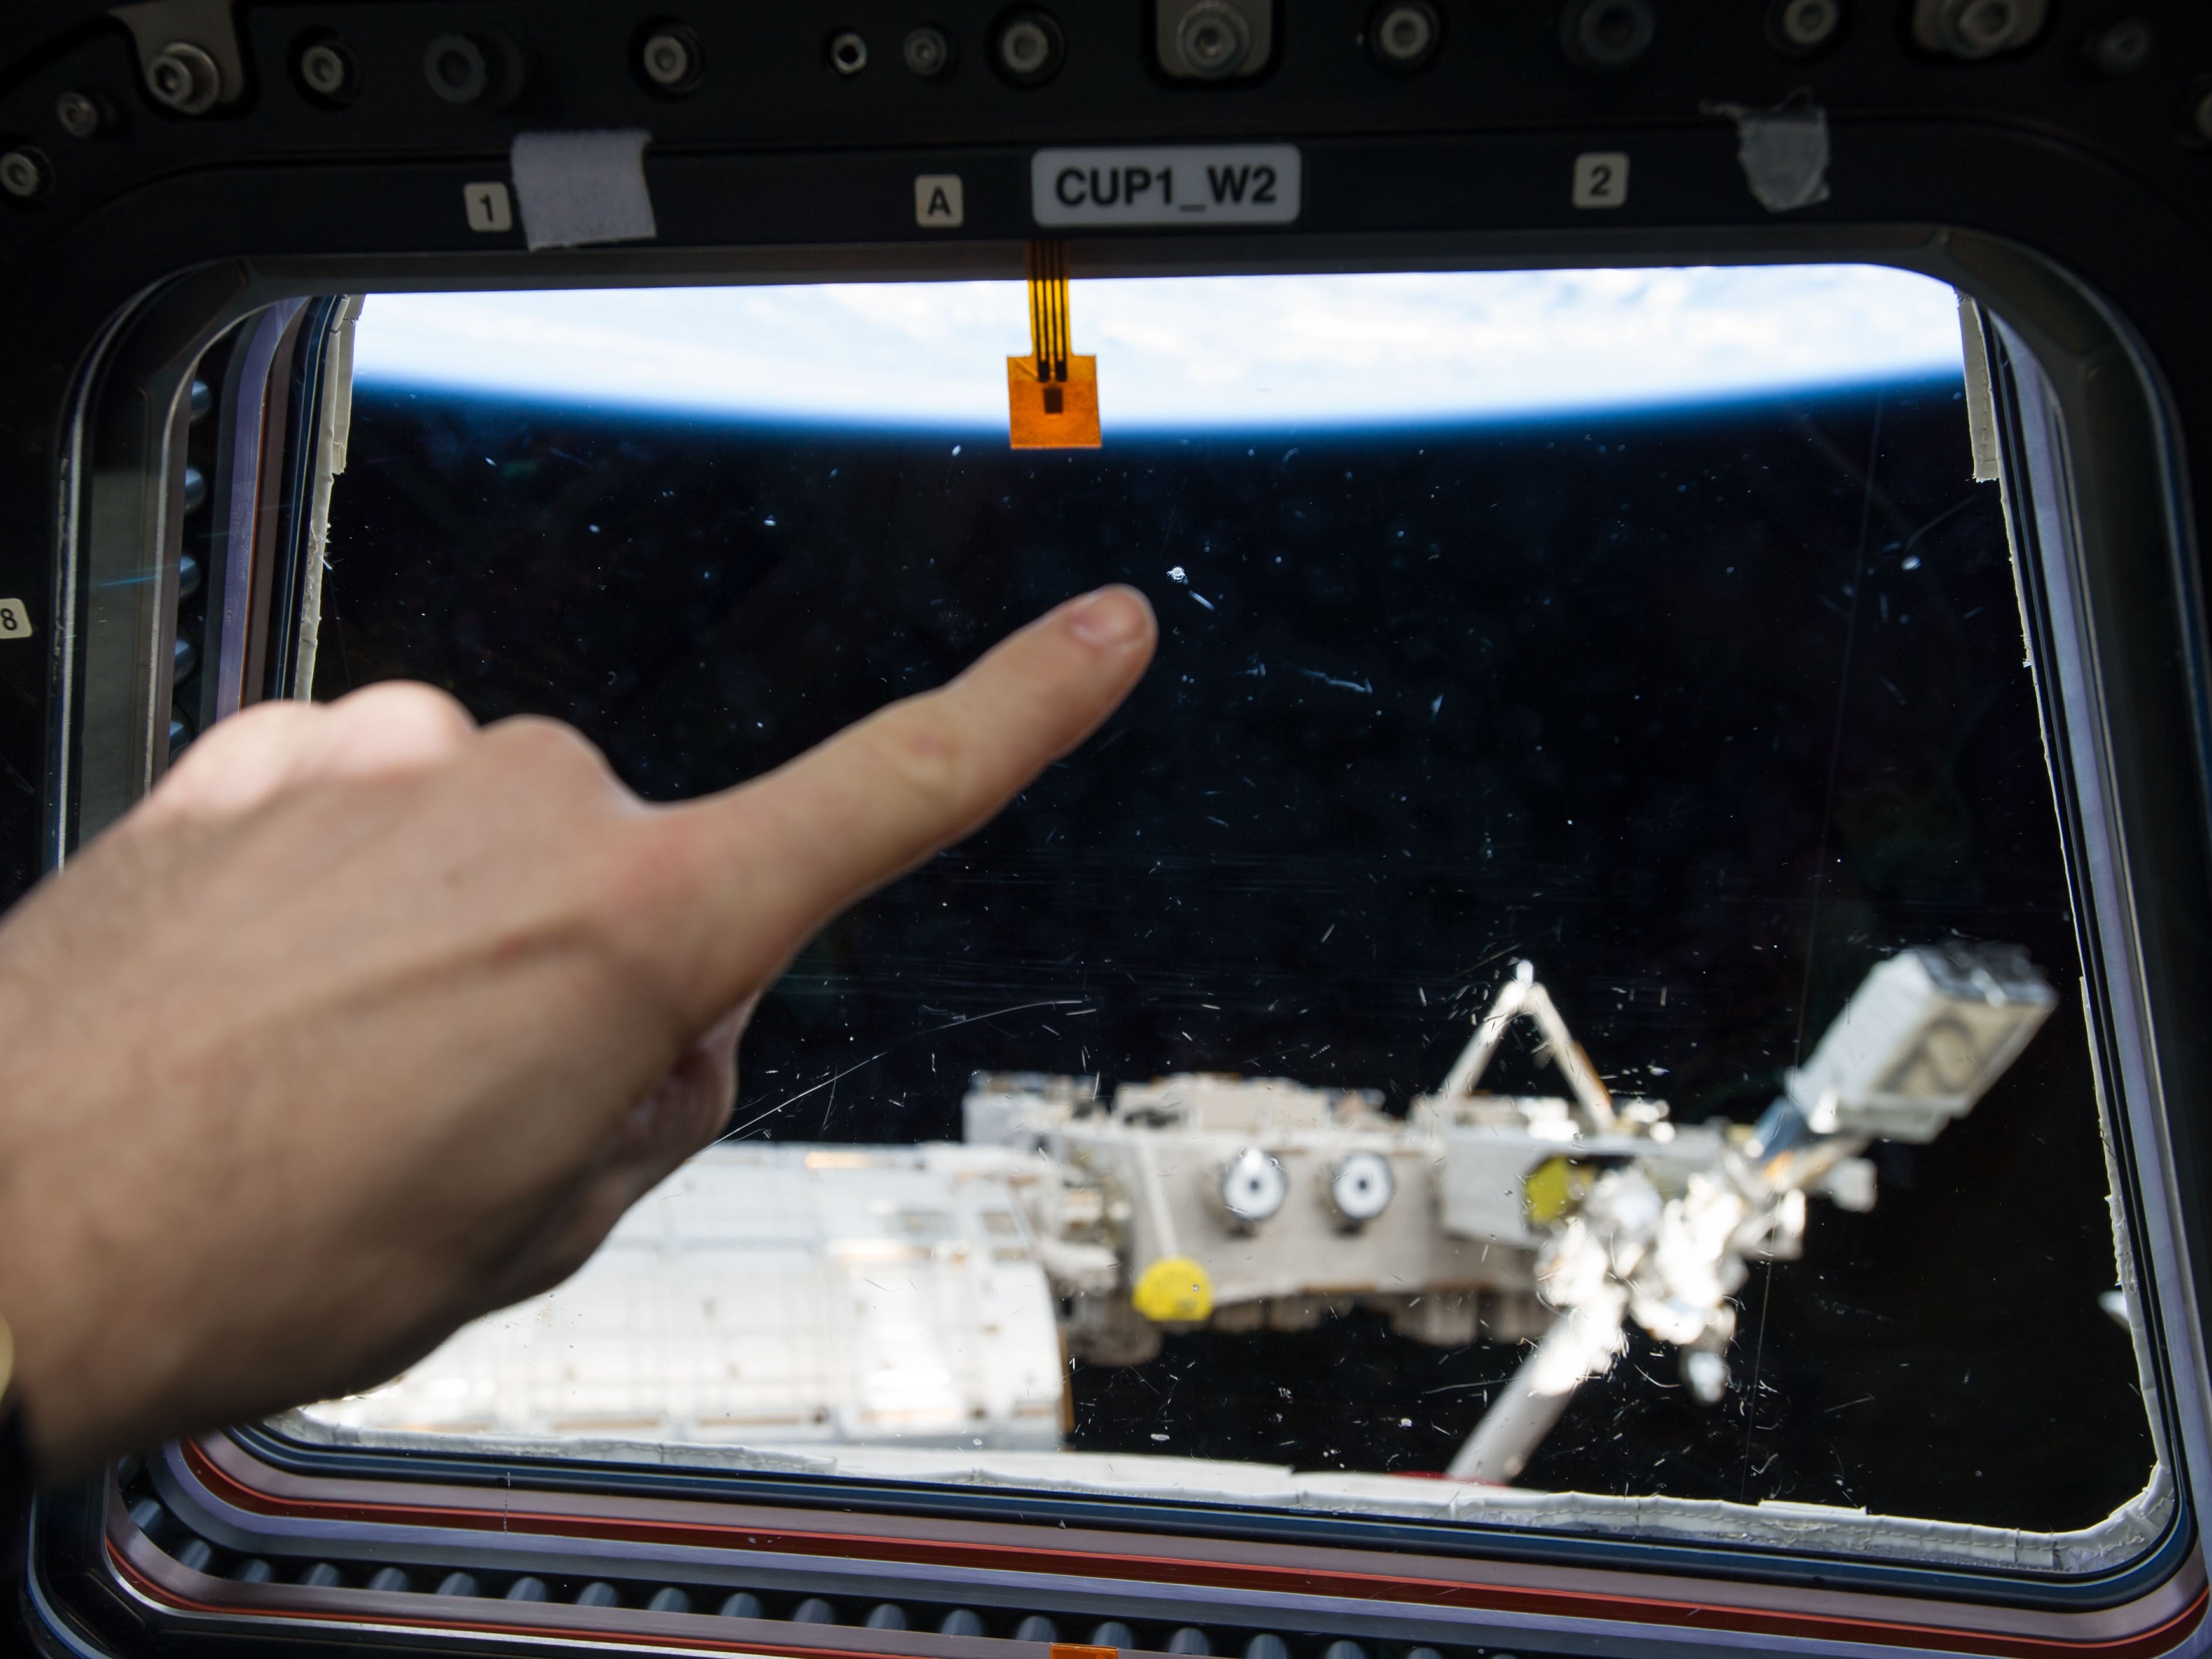 Small marks closeup were mistaken for distant unidentified flying objects from the ISS window